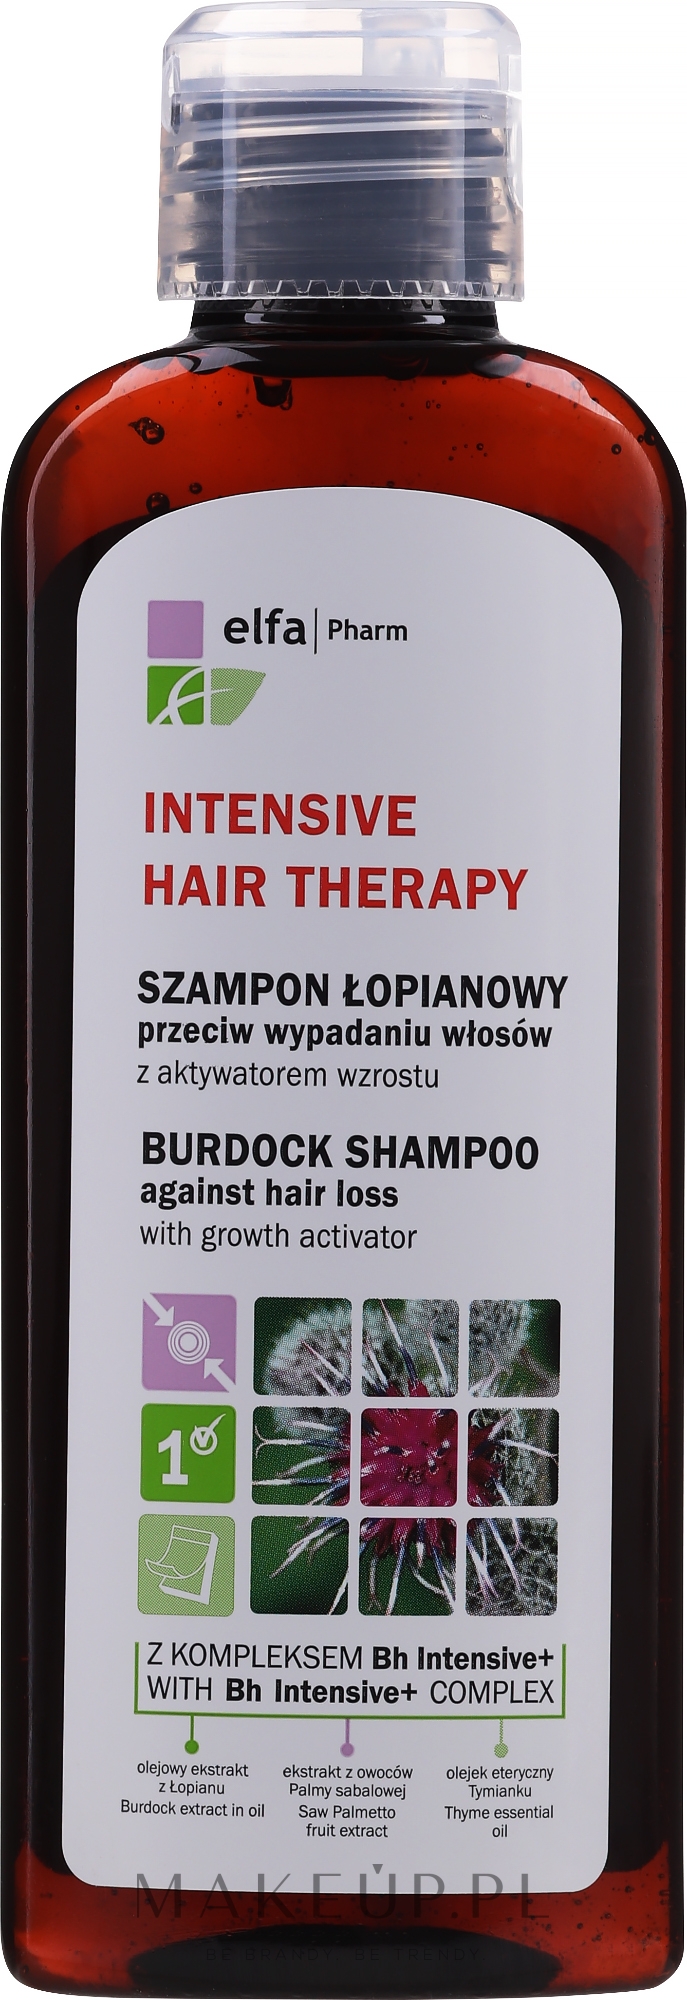 ntensive hair therapy szampon łopianowy